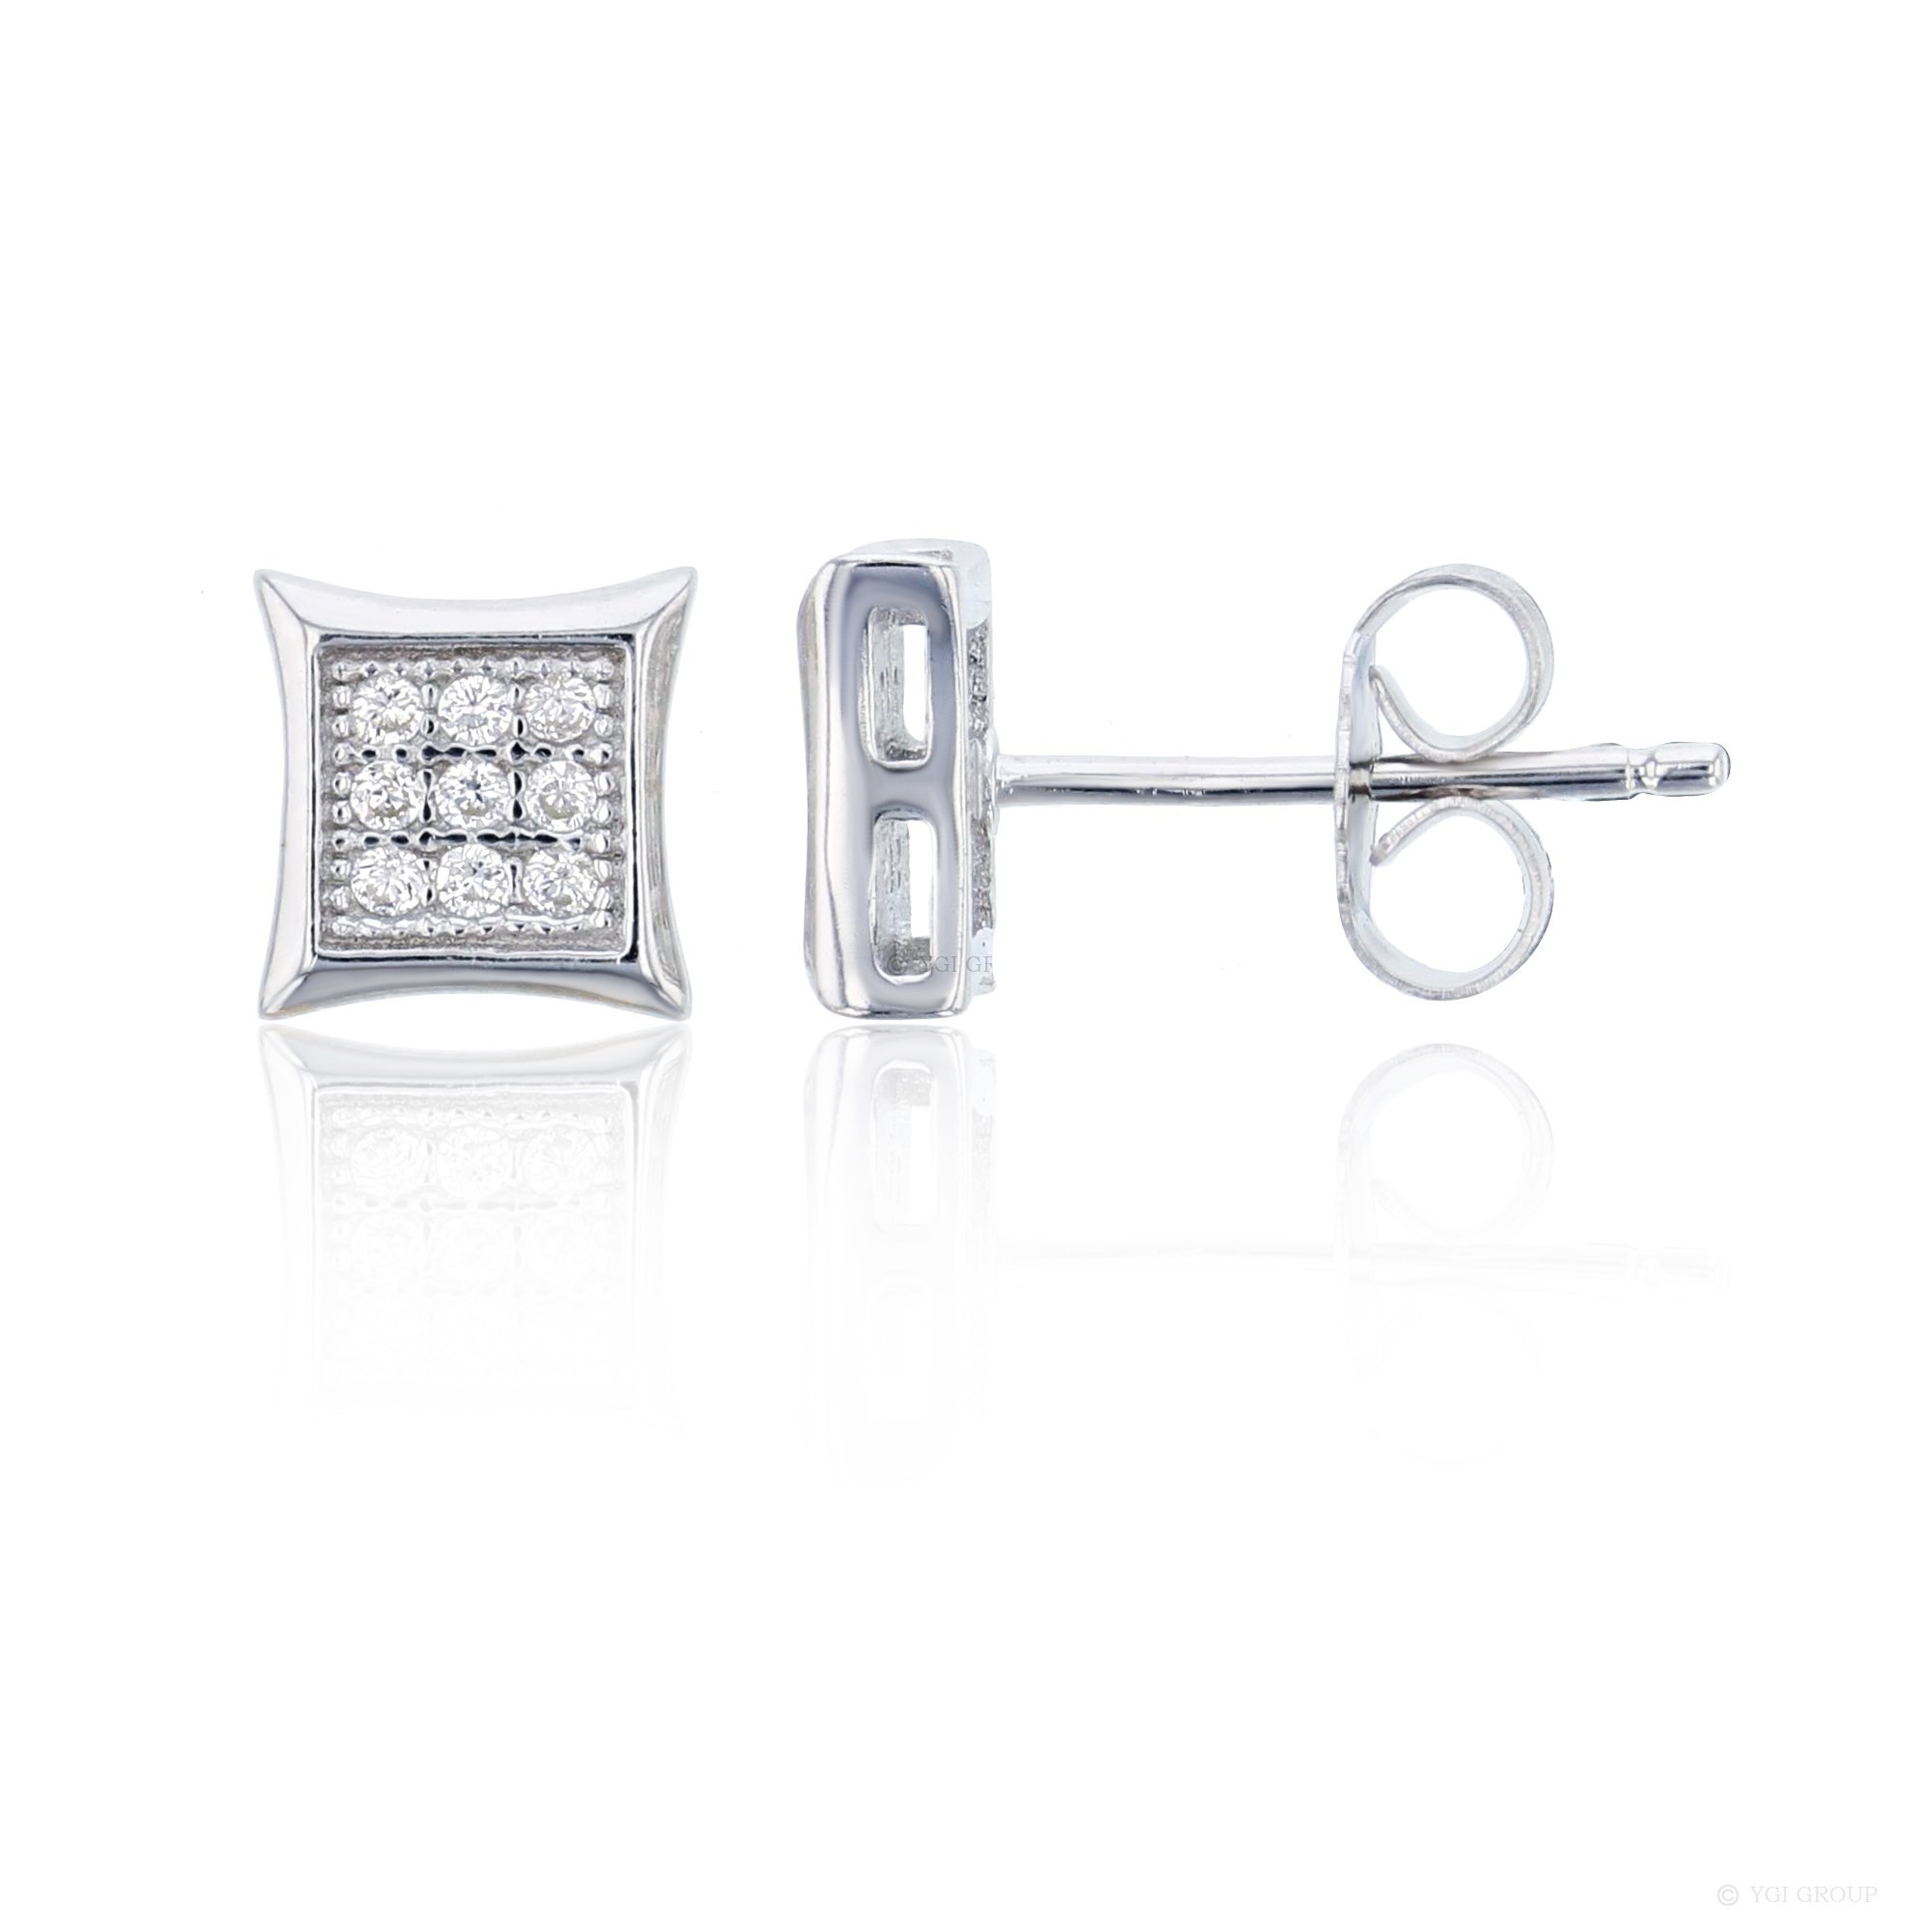 Sterling Silver 3x3 Pave Square Stud